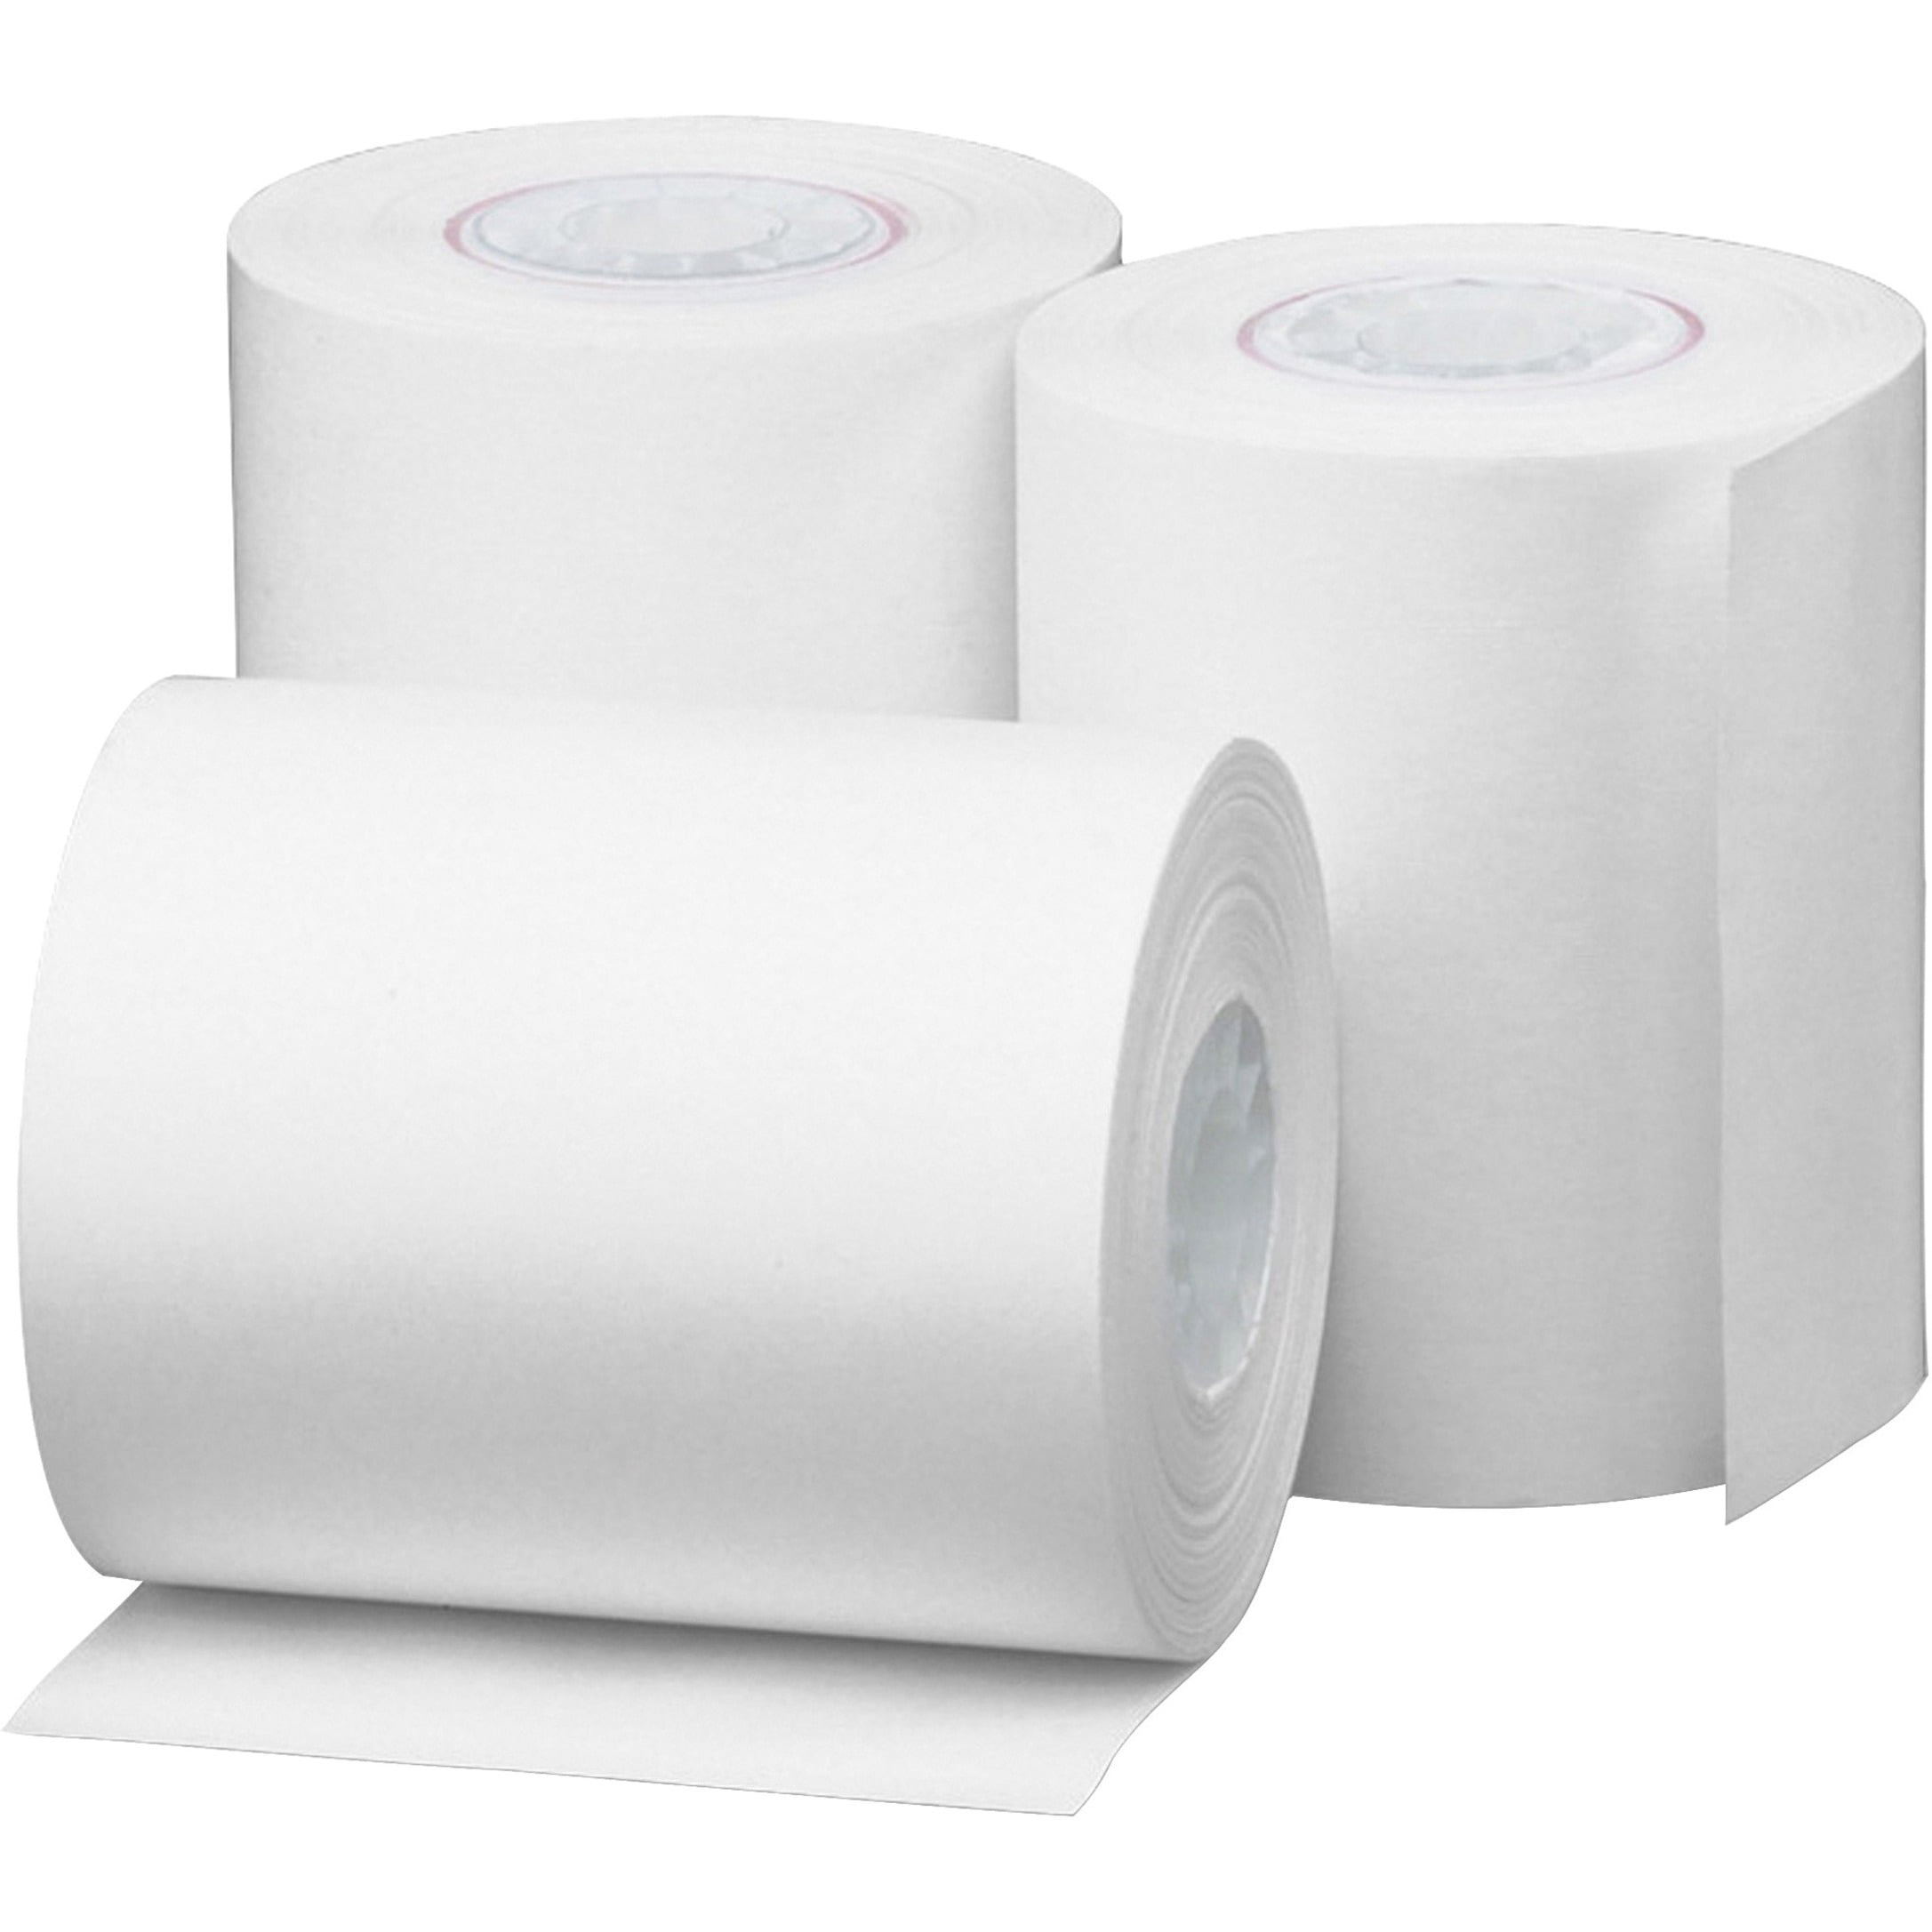 2-1/4 in 12/Pack White New x 80 ft. Details about   PM Company 6370 Thermal Paper Rolls 